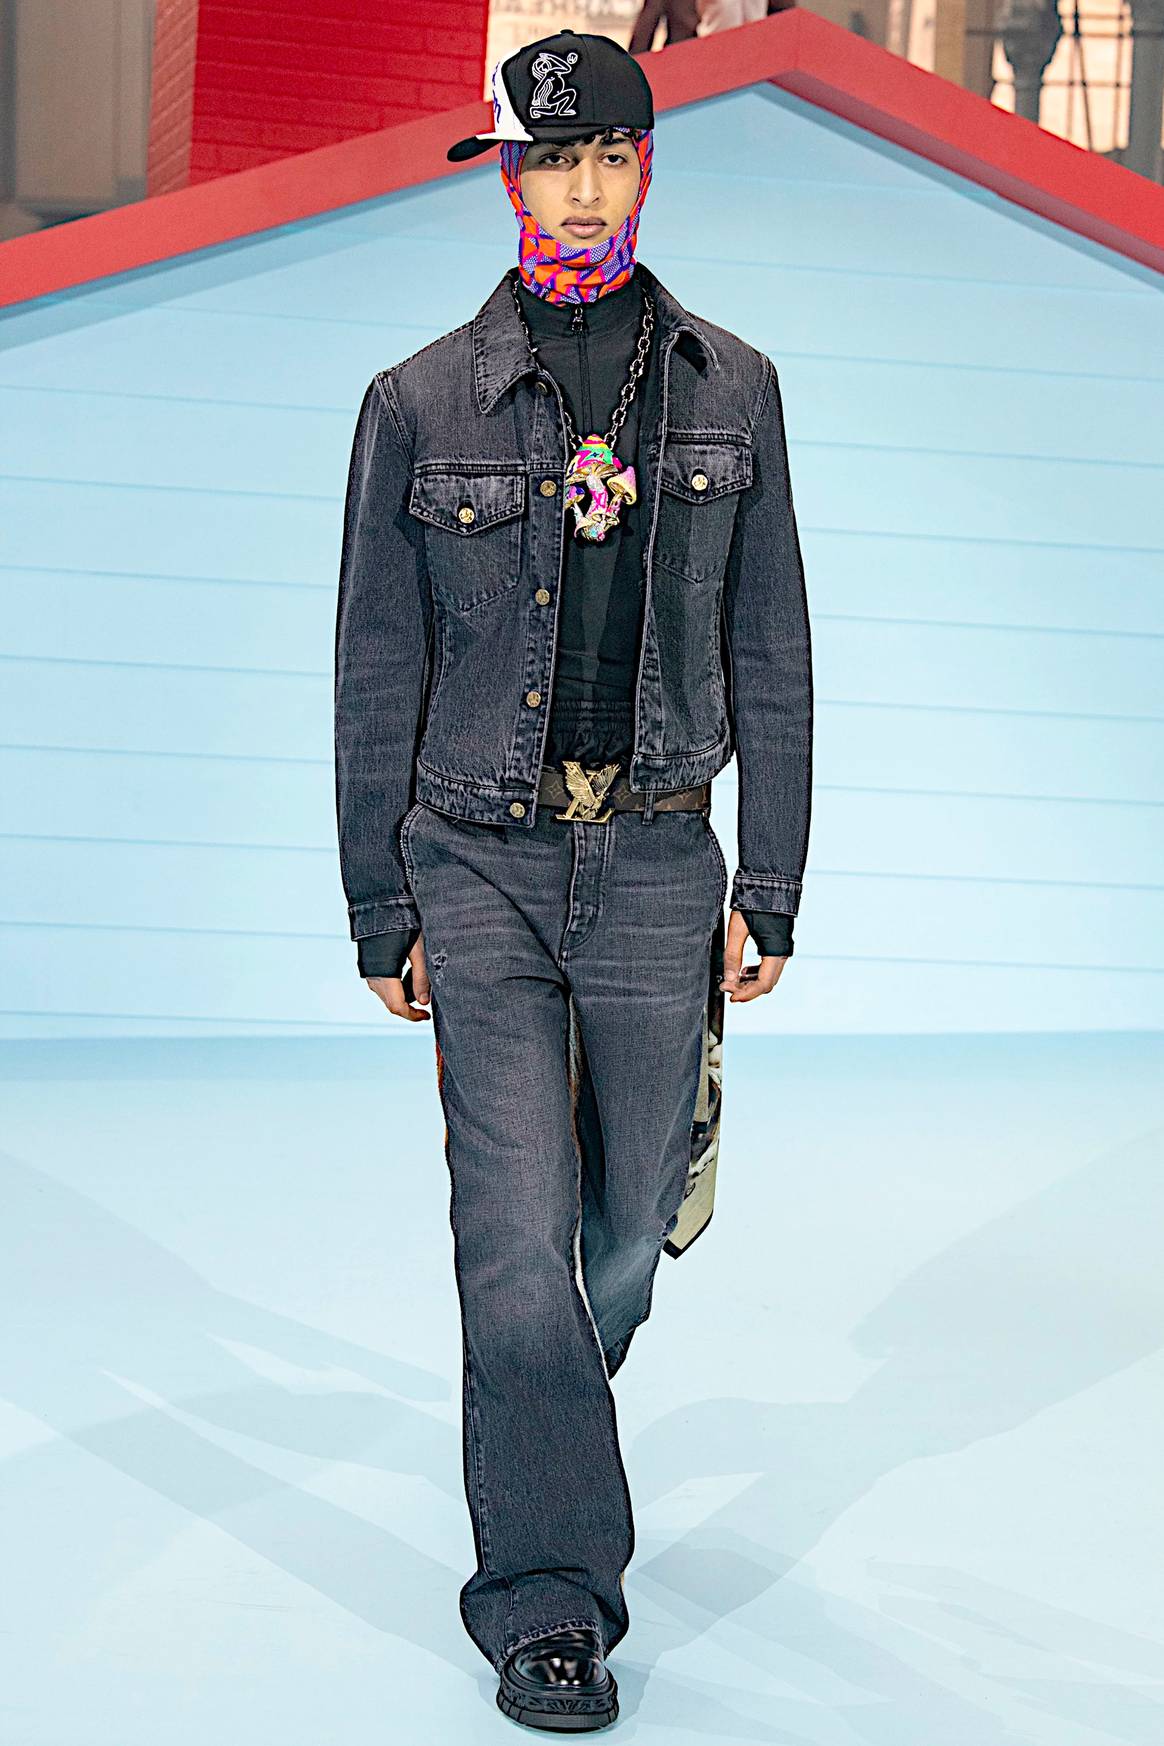 FW22 Denim Trends: soft acid, patches and quilted effects